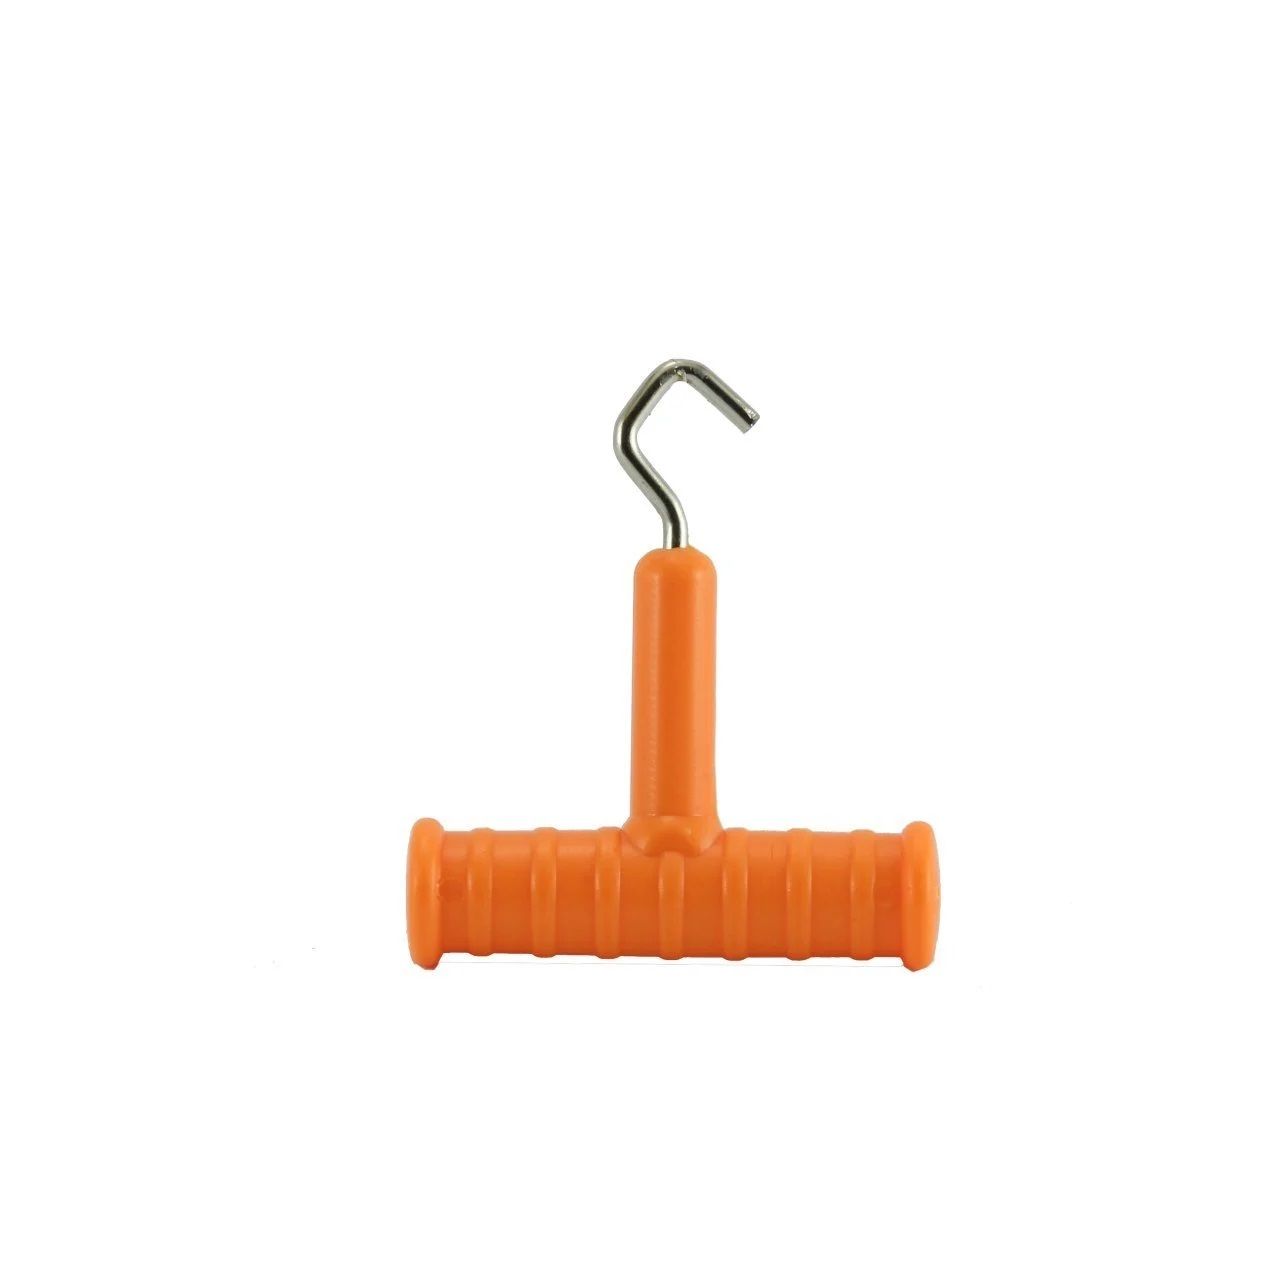 Exc Knot Puller